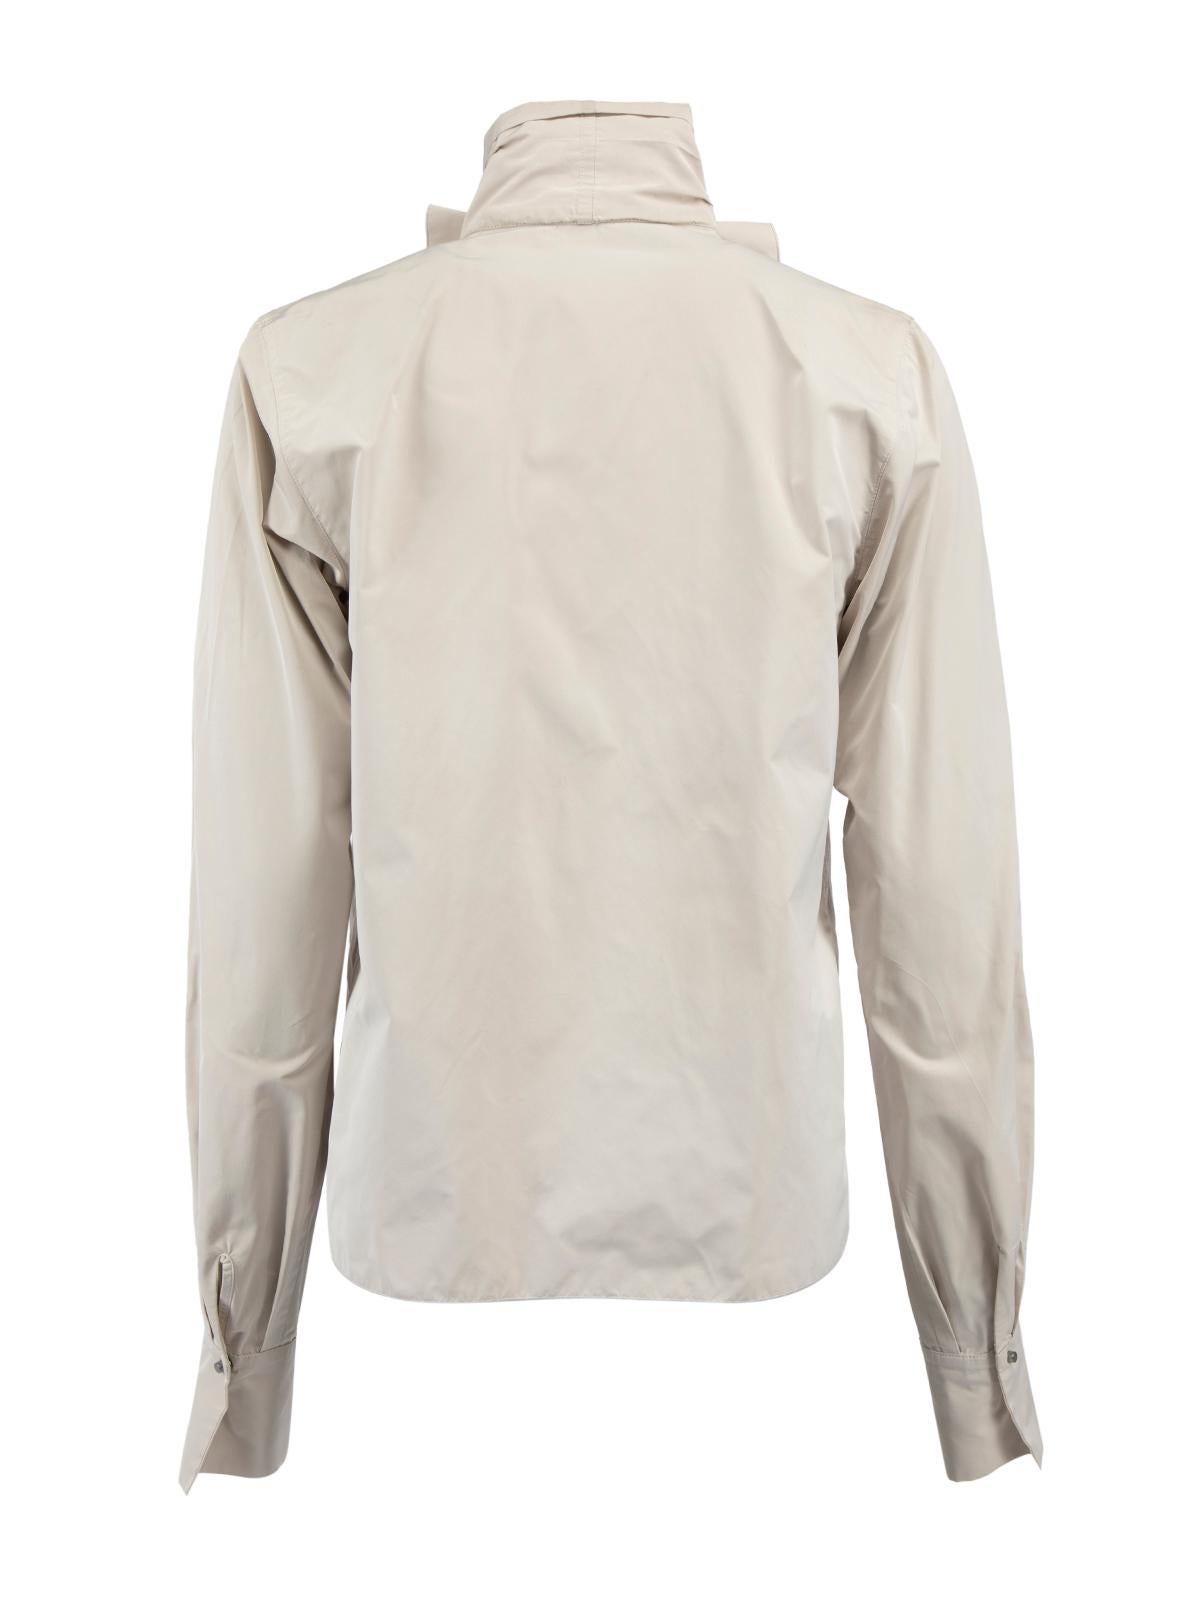 Pre-Loved Lanvin Women's Beige Zip Up Long Sleeve Shirt with Ruffle Trim In Excellent Condition In London, GB